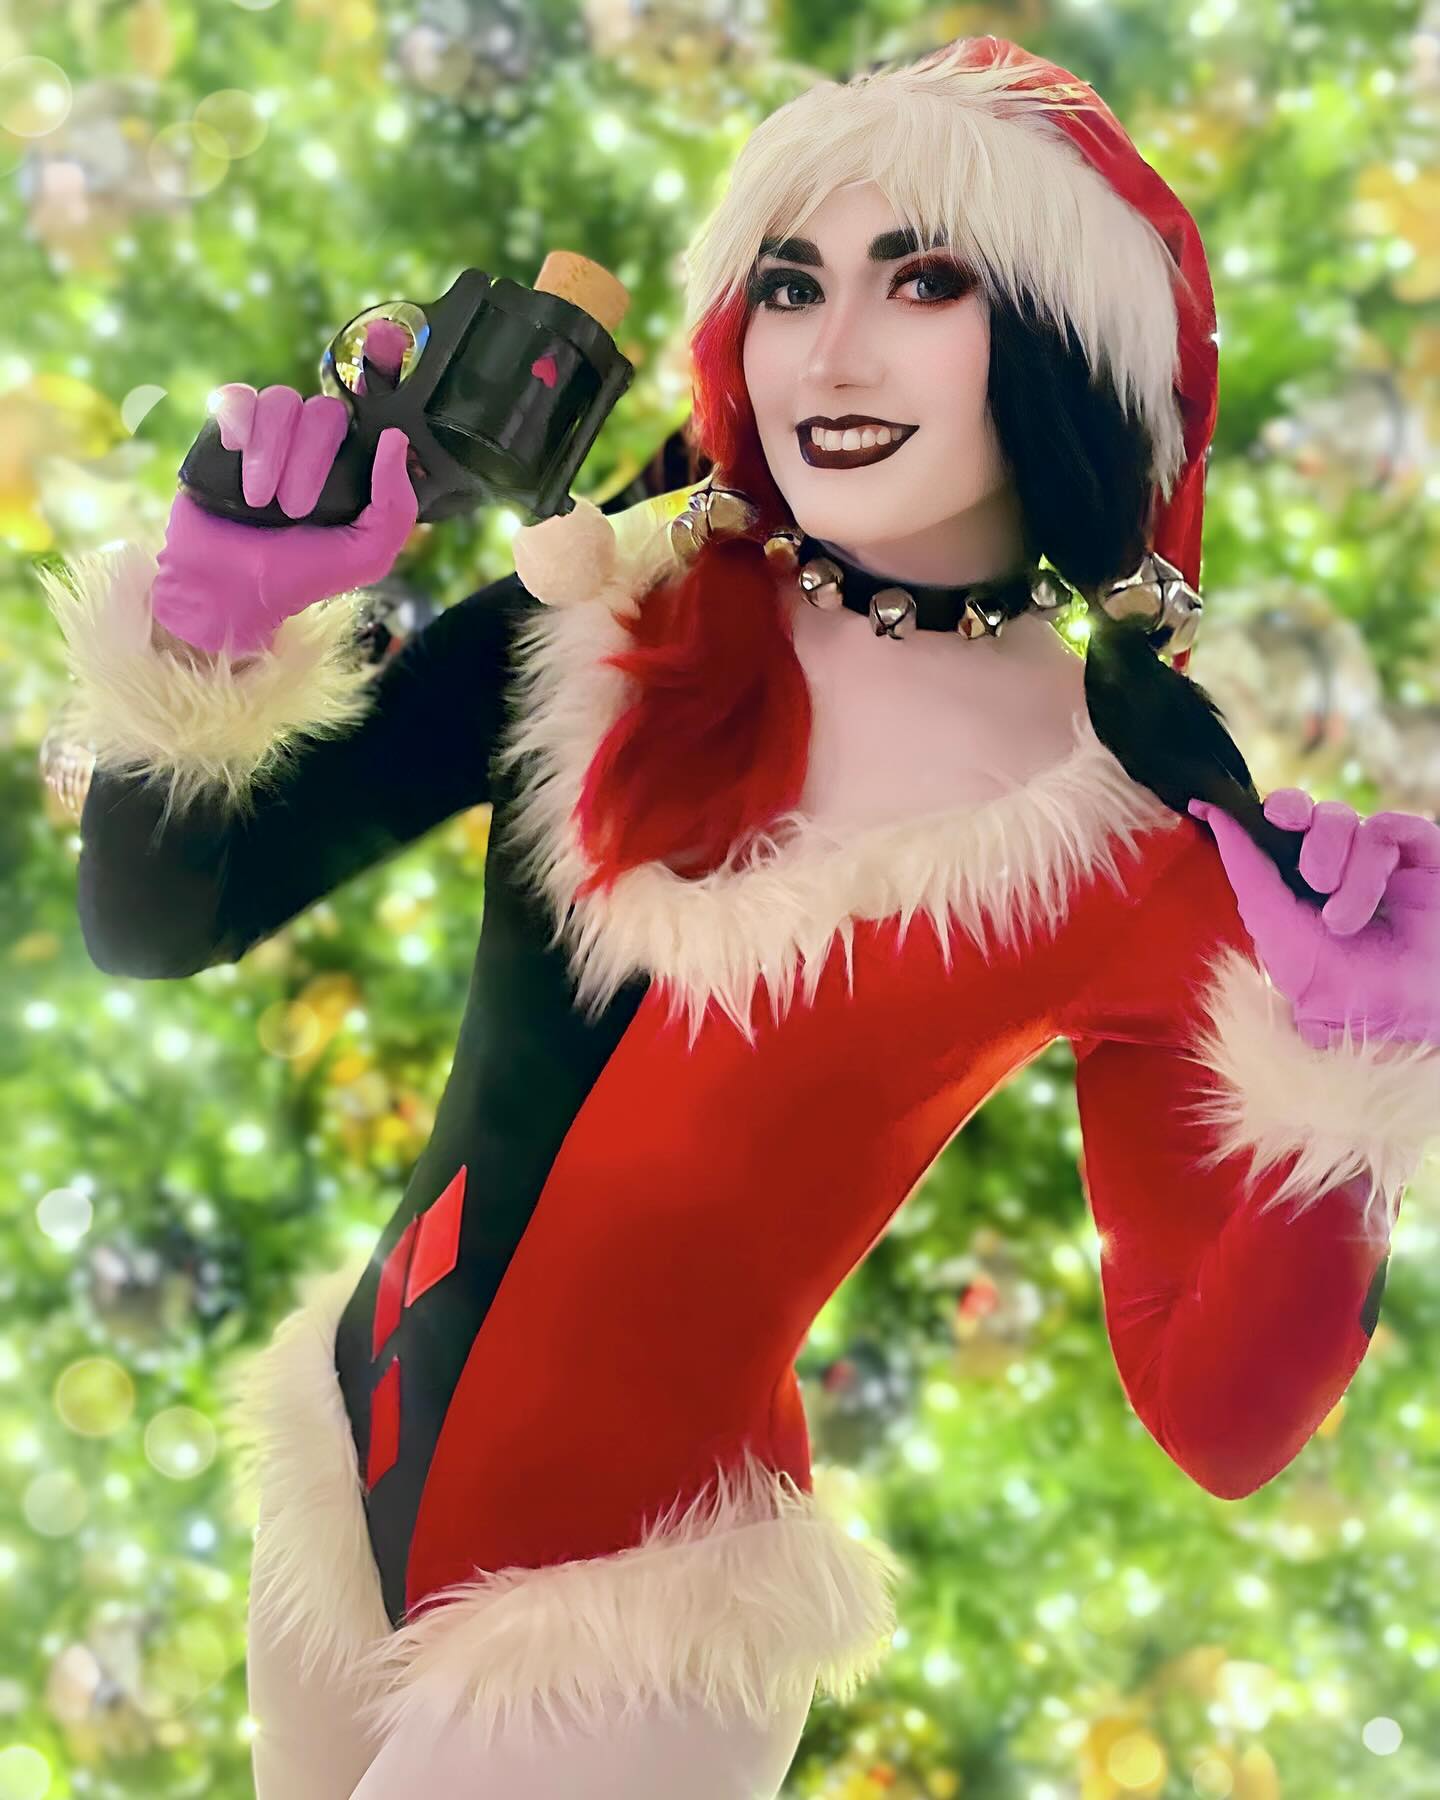 Happy Harleydays to those who celebrate! ❤️💚 Finally getting around to doing a little HolMat photo dump!! I had so much fun running around as Holiday Harley again, I only wear her once a year to HolMat, and she’s become a fun little Christmas tradition for me! 🥹 So here’s some photos from Friday night when I was flitting around the con as her! ❤️ Anyways, whether you’re spending today with family, friends, or just vibing on your couch like me hehe, I hope you’re having a good day regardless 🥹❤️ The holidays can sometimes be a tough time, so even if all you did today was survive that’s okay ❤️ Remember to be kind and patient with yourself and know that you are loved and you’re always enough! 🎄
.
.
.
.

Costume made by the incredible @sehnsucht_clothing 🥹 thank you so much for creating one of my favorite cosplays to wear!! ❤️
.
.
.
.

A big thank you to @hauntedhostess for nabbing some pics of my Harley under the tree 🥹❤️
.
.
.
.
#happyharleydays #harleyquinn #harleyquinncosplay #holidayharley #merrychristmas #happyholidays